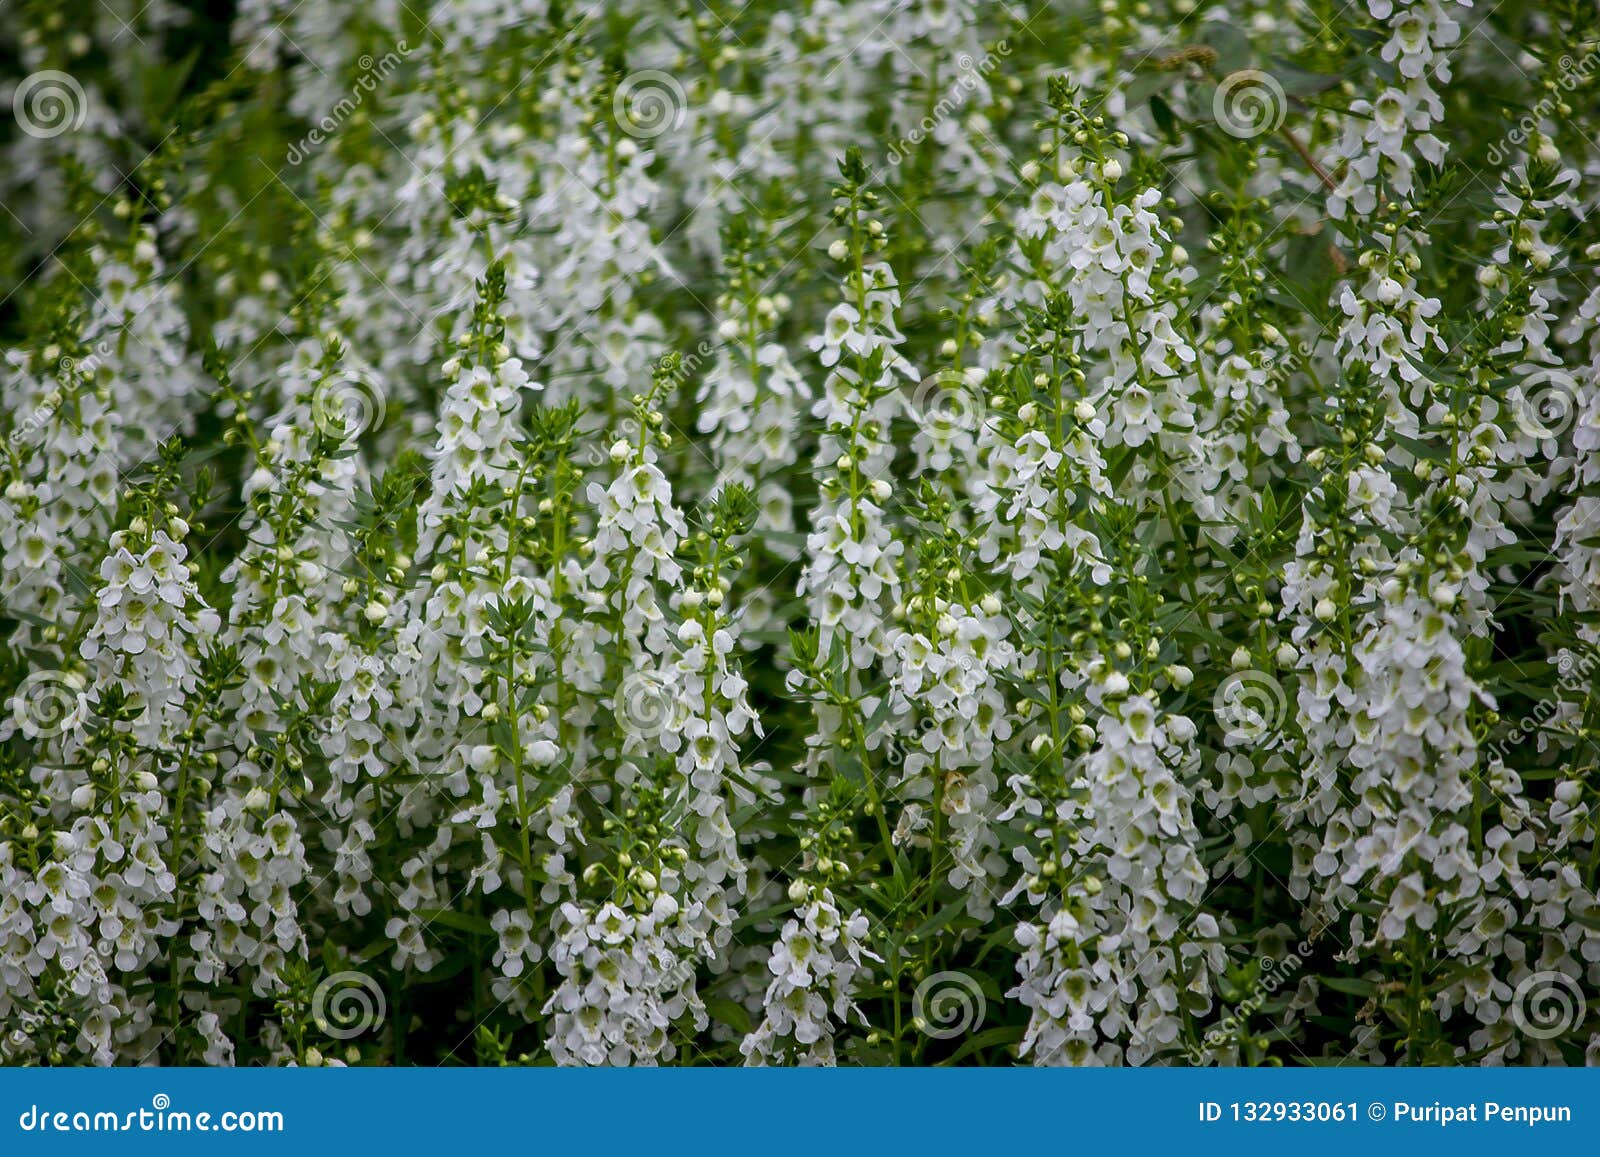 Angelonia Planted To Decorate The Garden Stock Image Image Of Backdrop Angelonia 132933061